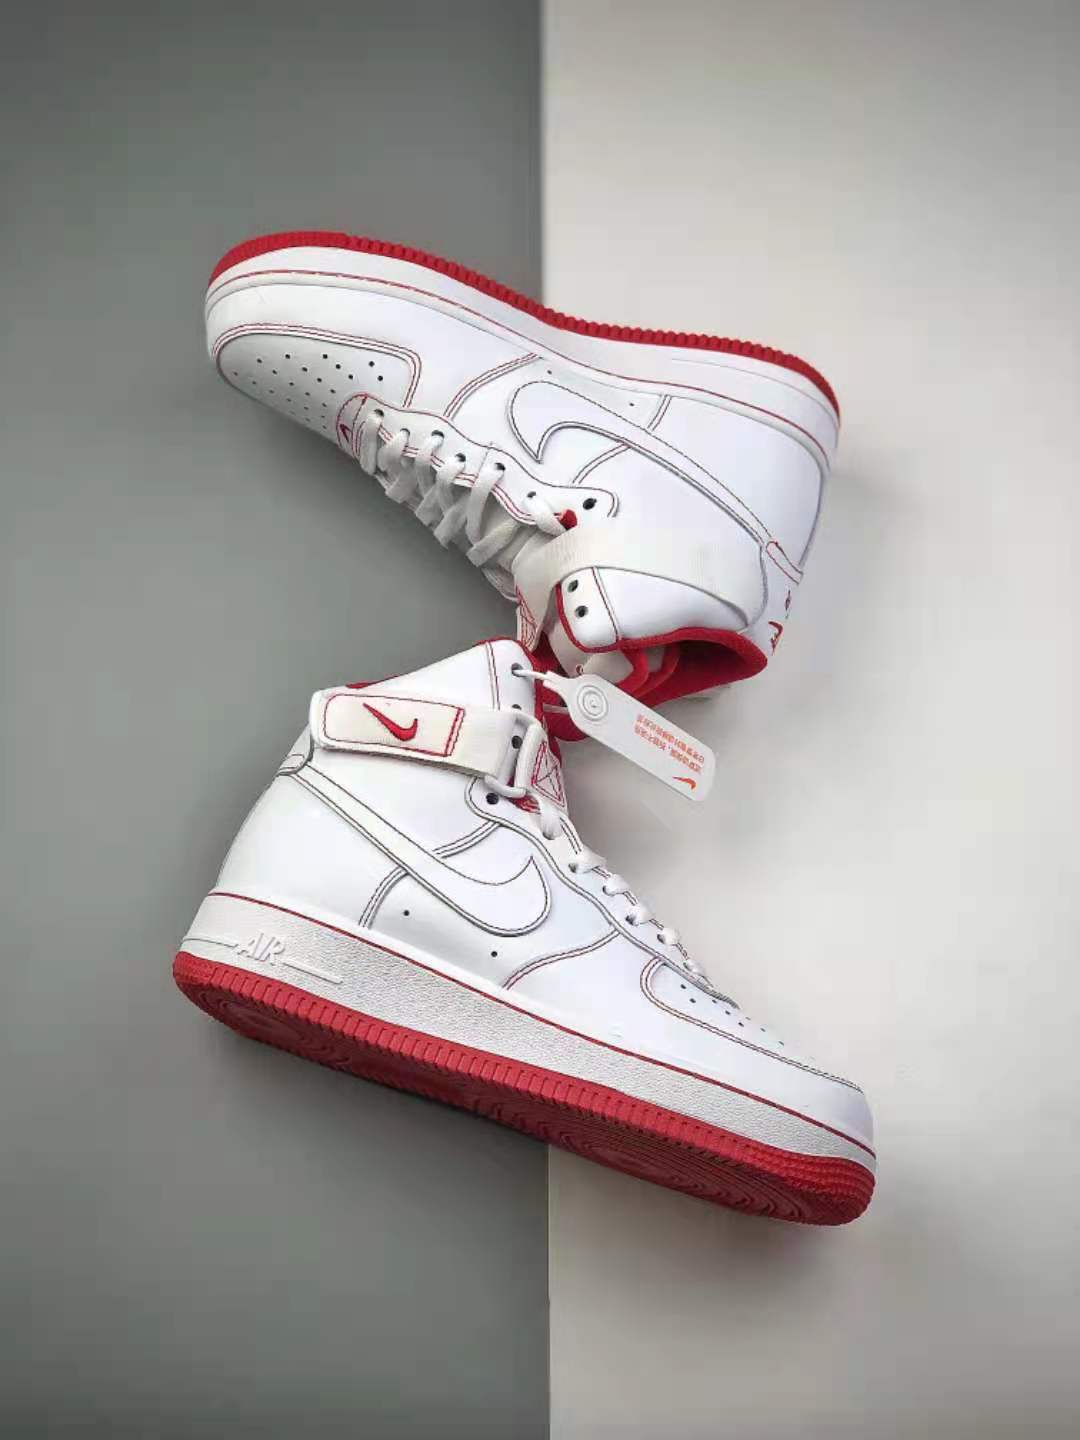 Nike Air Force 1 High '07 White University Red CV1753-100 - Premium Sneakers for Style and Comfort